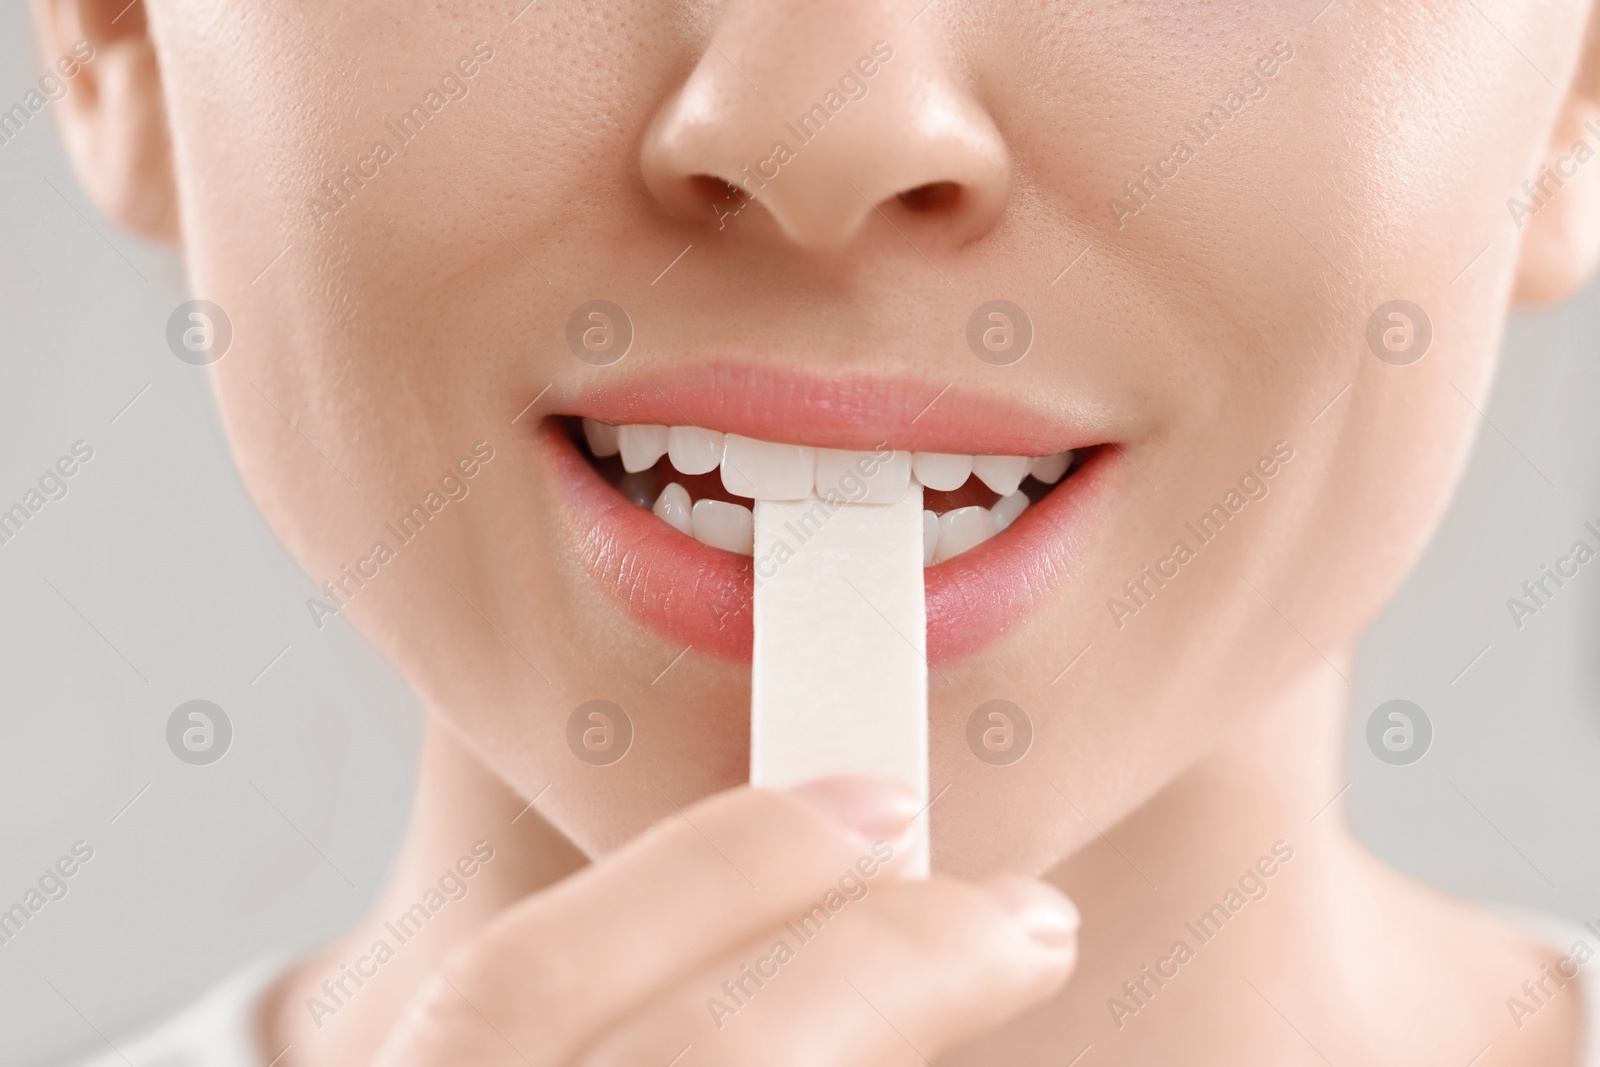 Photo of Woman putting chewing gum piece into mouth on blurred background, closeup